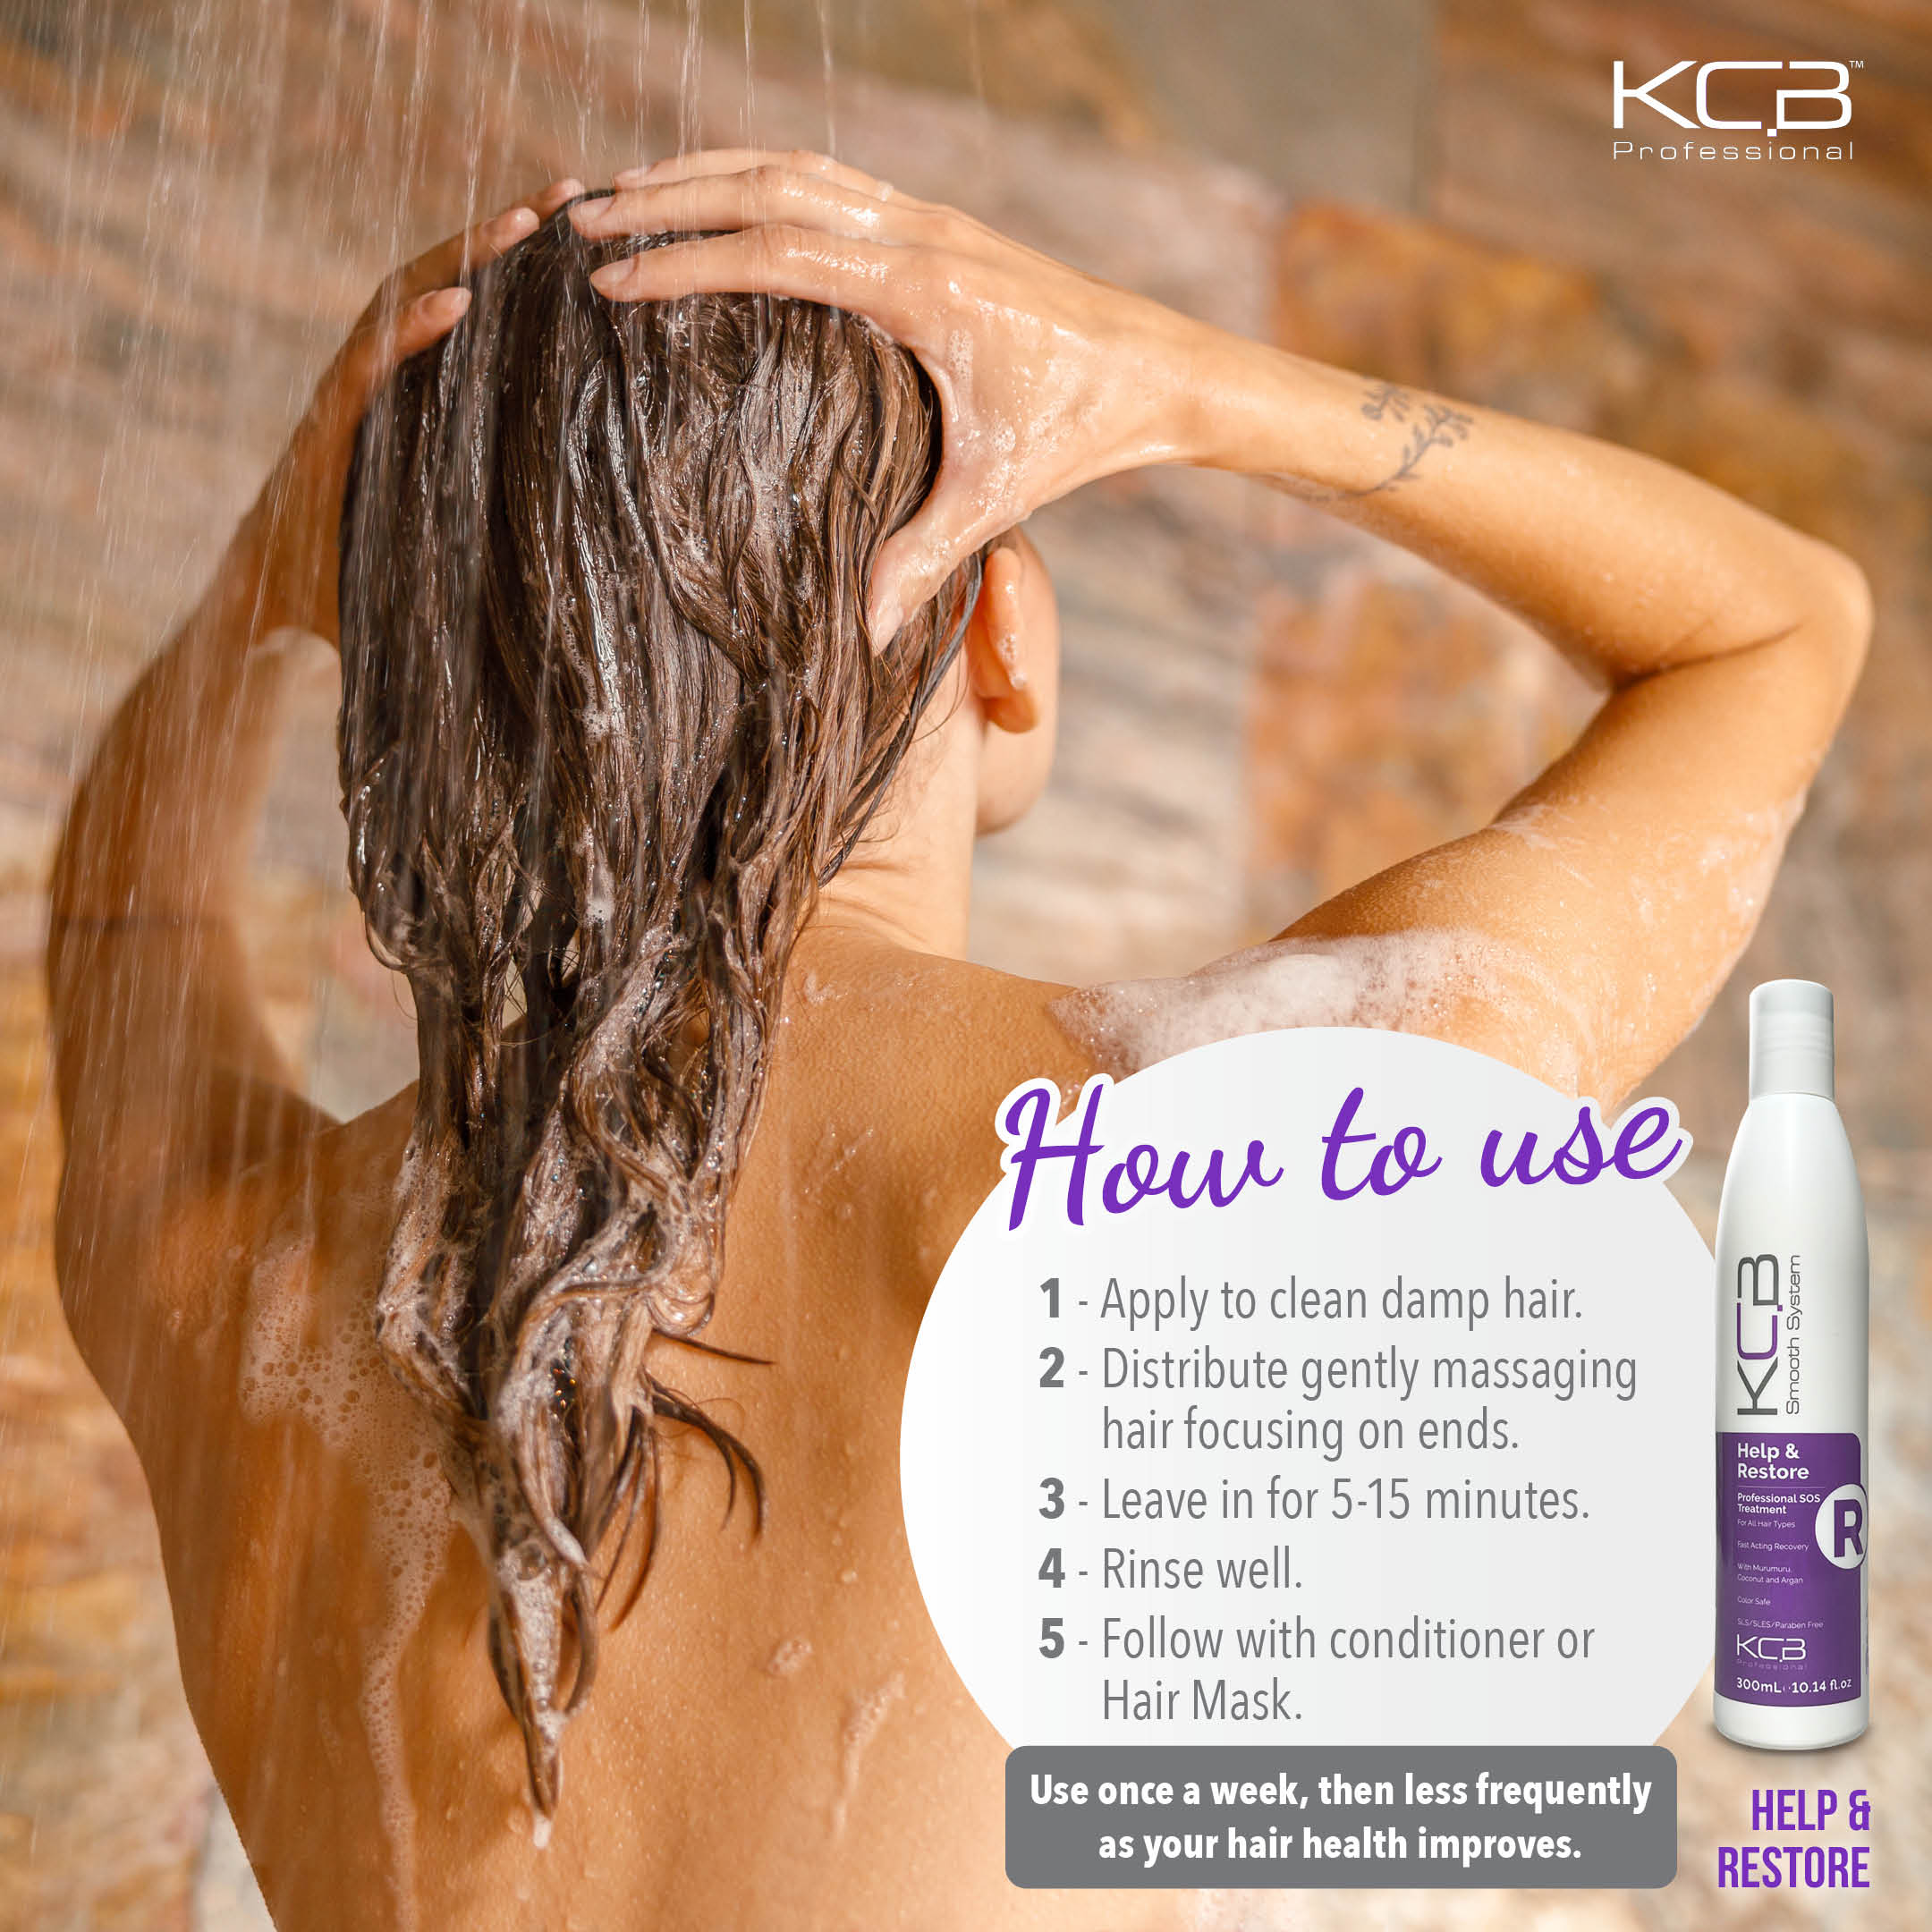 KCB Professional Smooth Help and Restore, SOS Keratin Hair Repair Treatment for Dry or Damaged Hair. Repair Hair Damage from Heat, Bleach, Color, and Chemical Services. Smooths and Control Frizz.